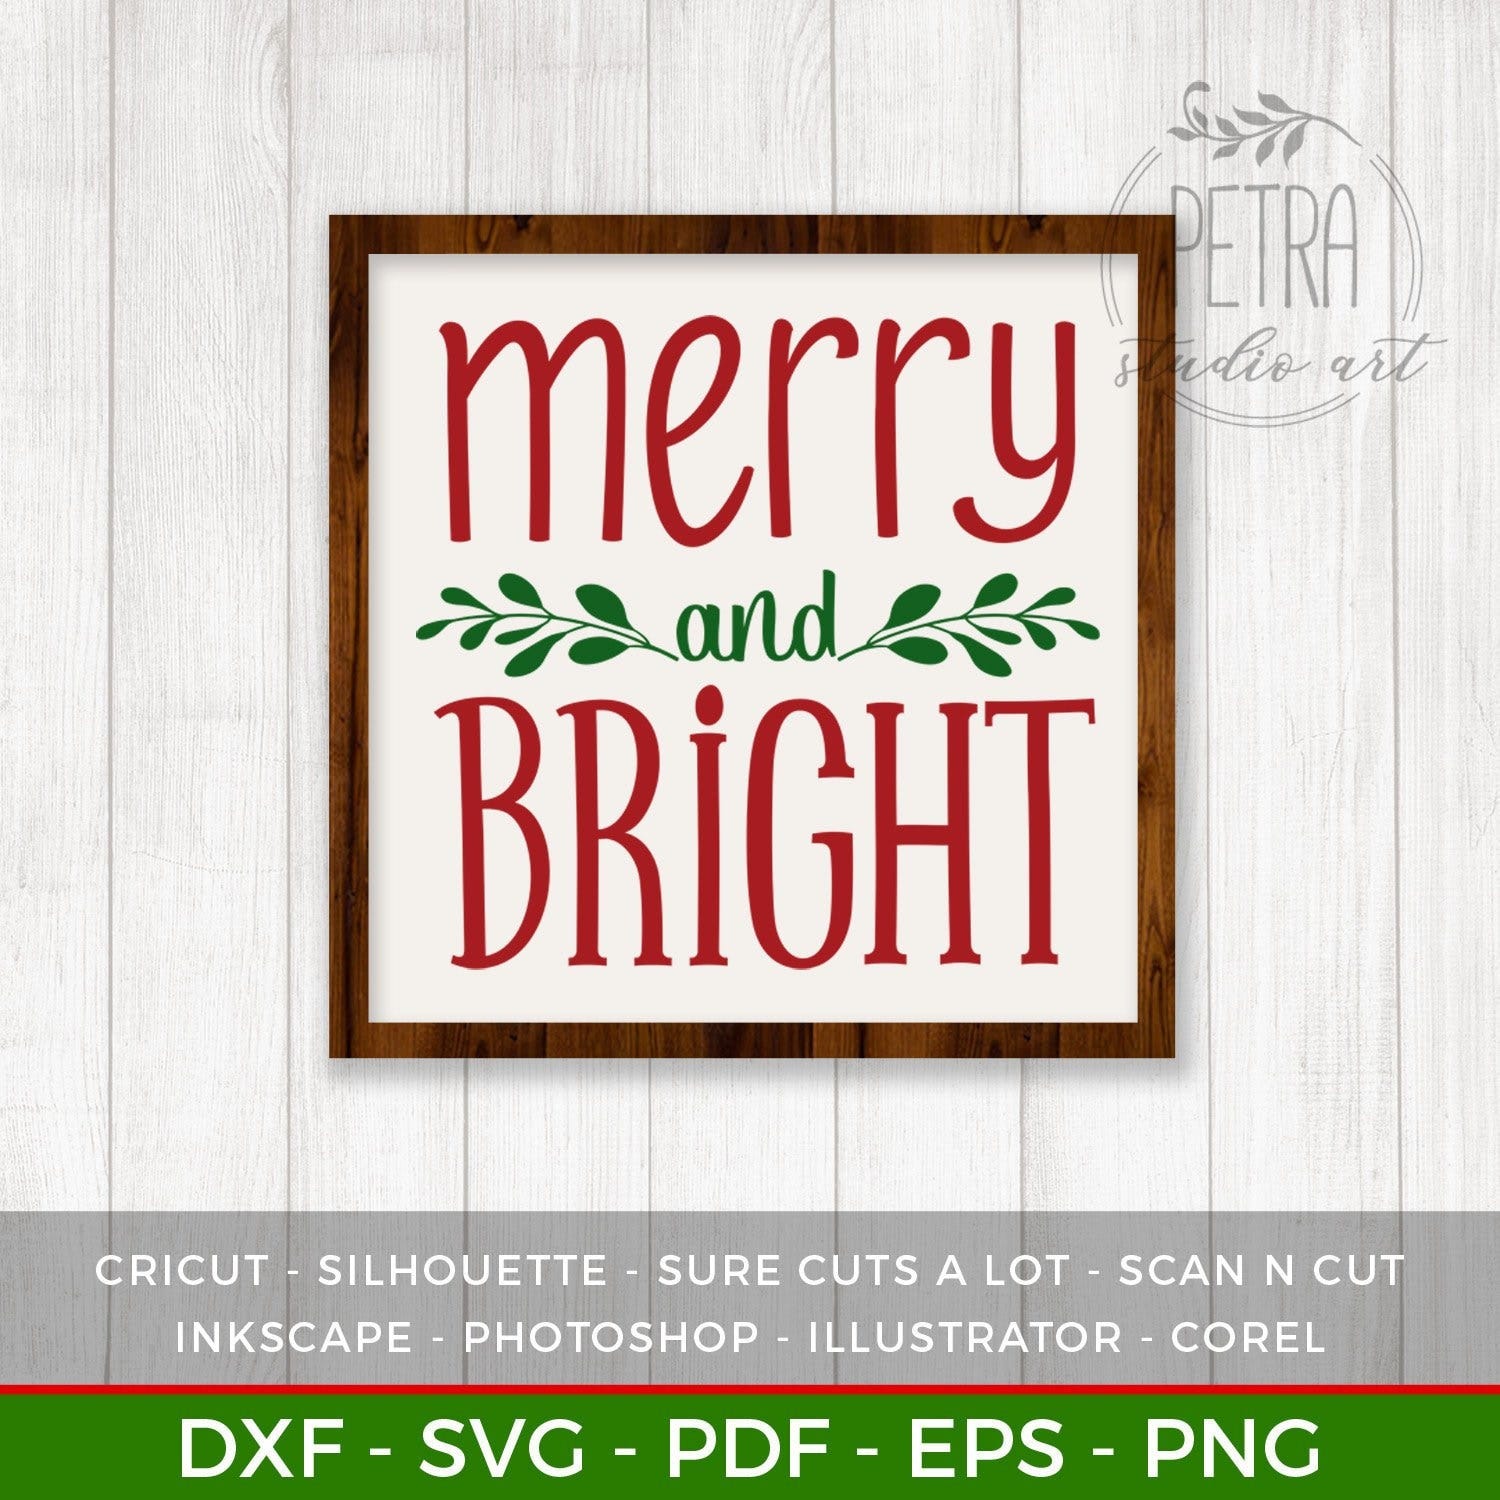 Merry and Bright Svg Dxf Cut File and Printable for Christmas Home Decor and Rustic Sign. Fixer Upper. Personal and small business use.